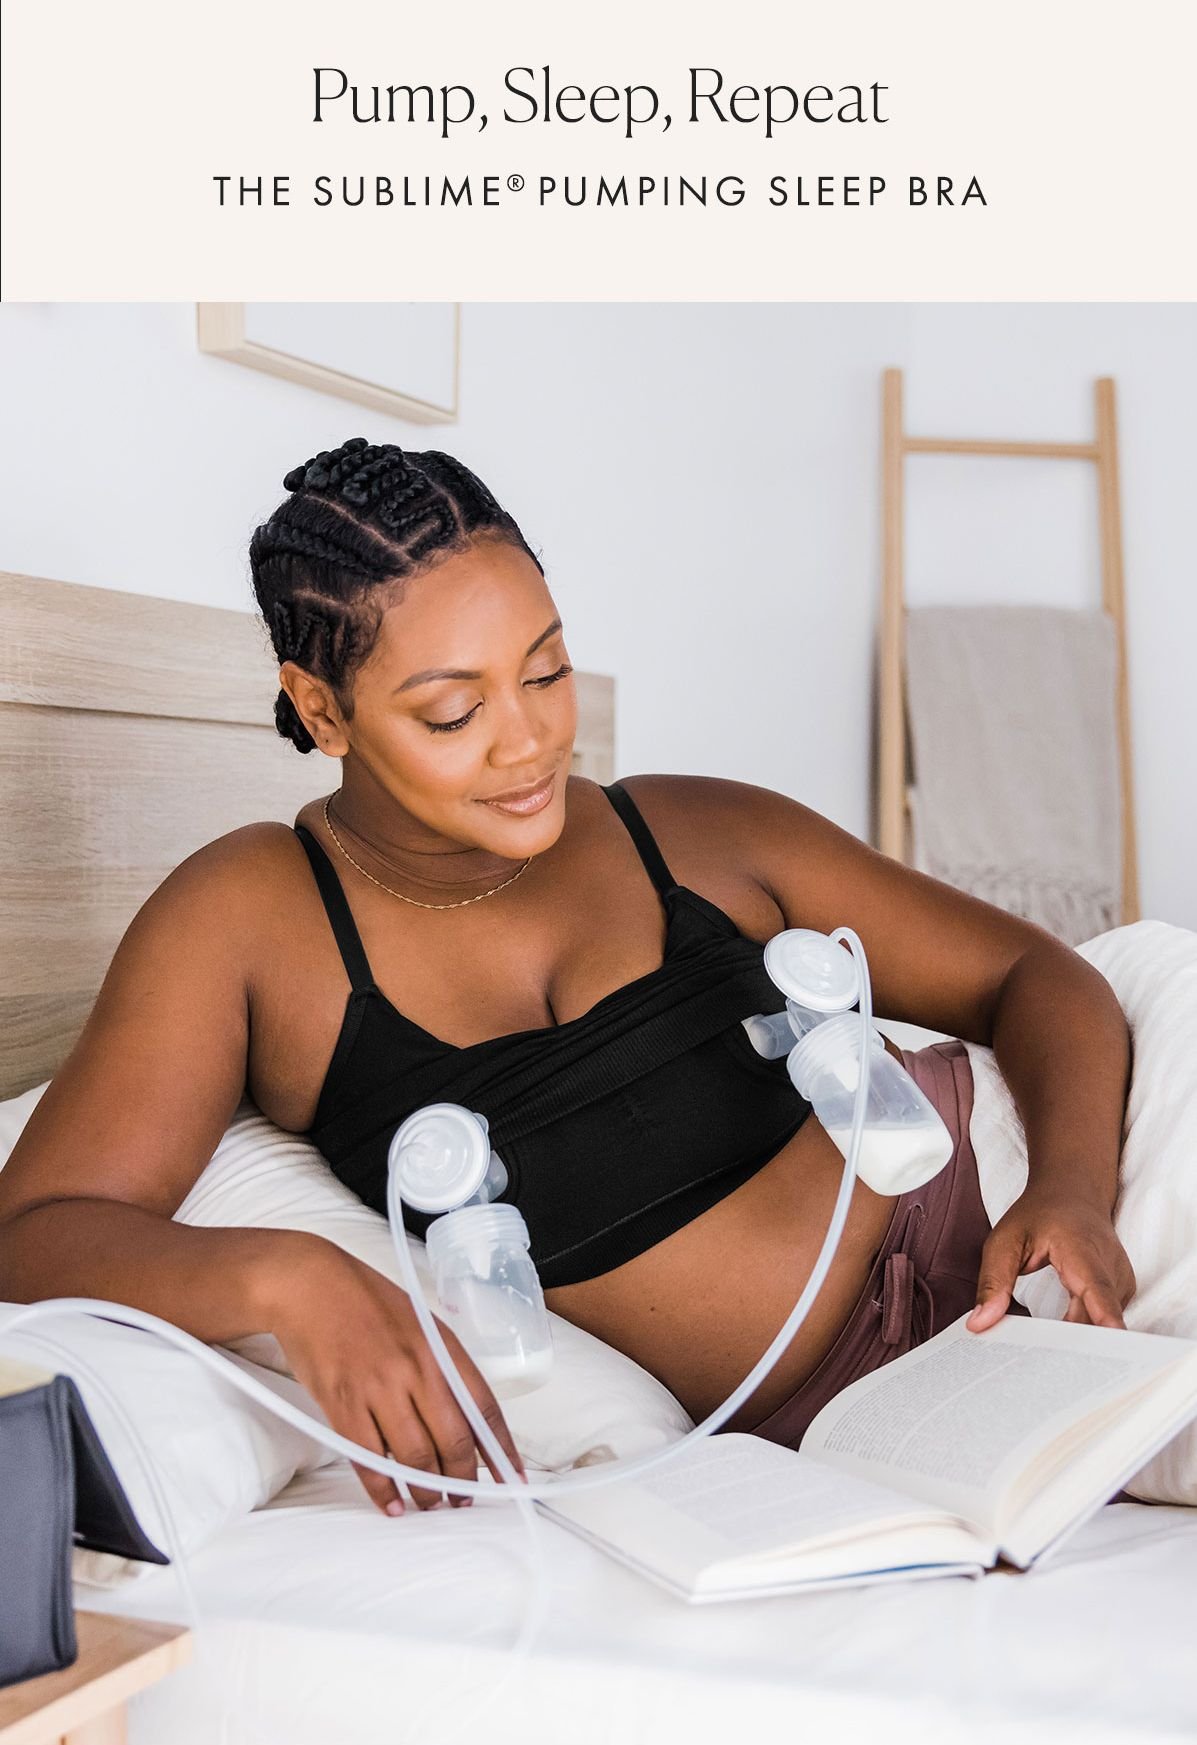 Kindred Bravely: This sleep bra does what?